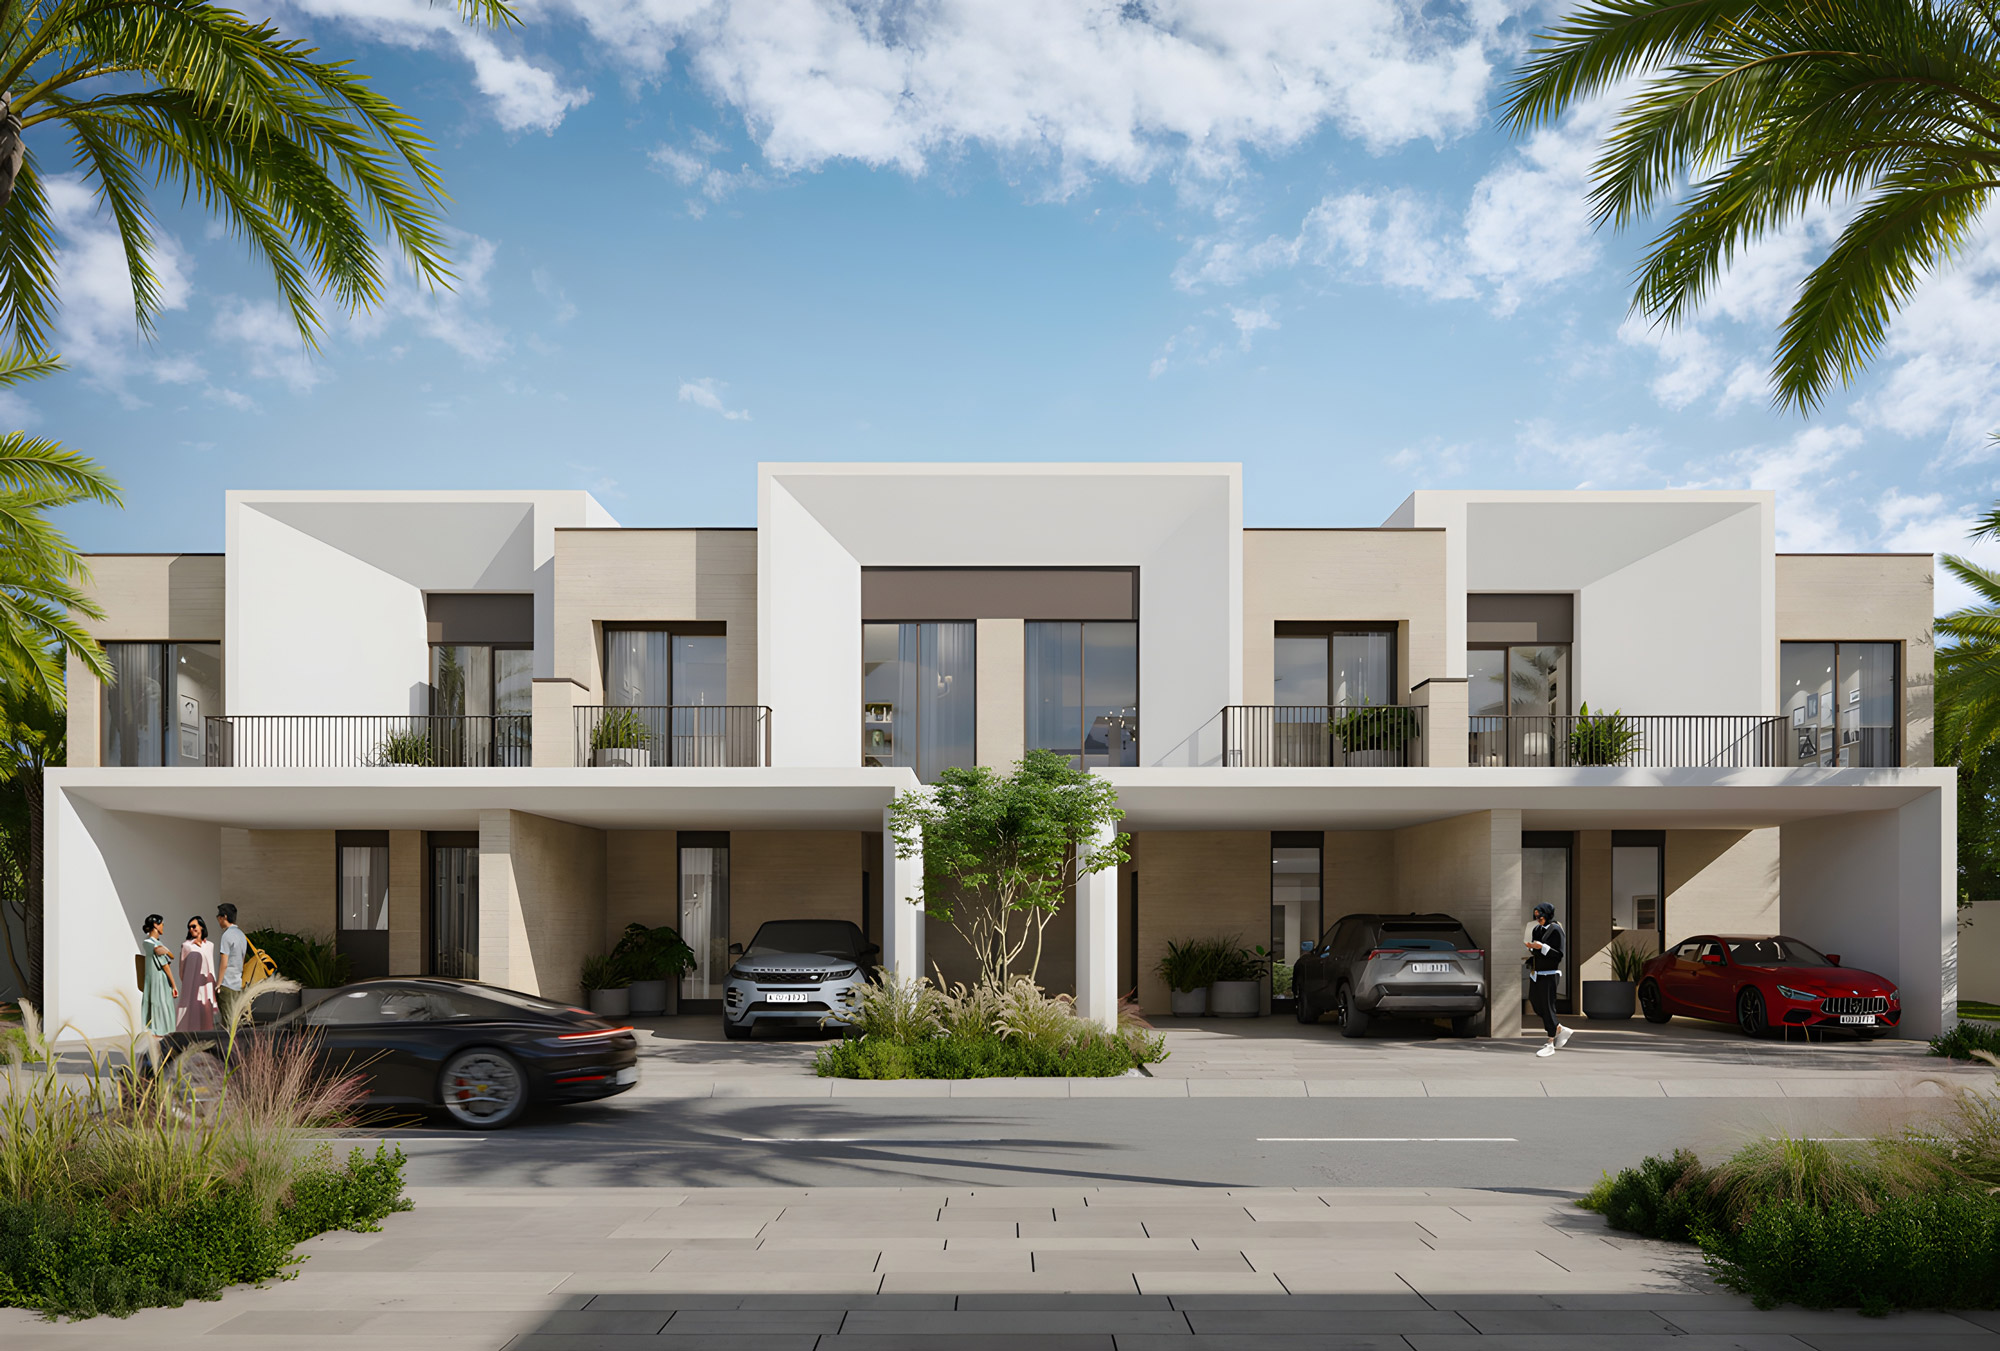 uploads/sale_property/4-br-townhouses-for-sale-in-may-at-arabian-ranches-iii/248ec81df52386abfa397dff79c2210a.webp